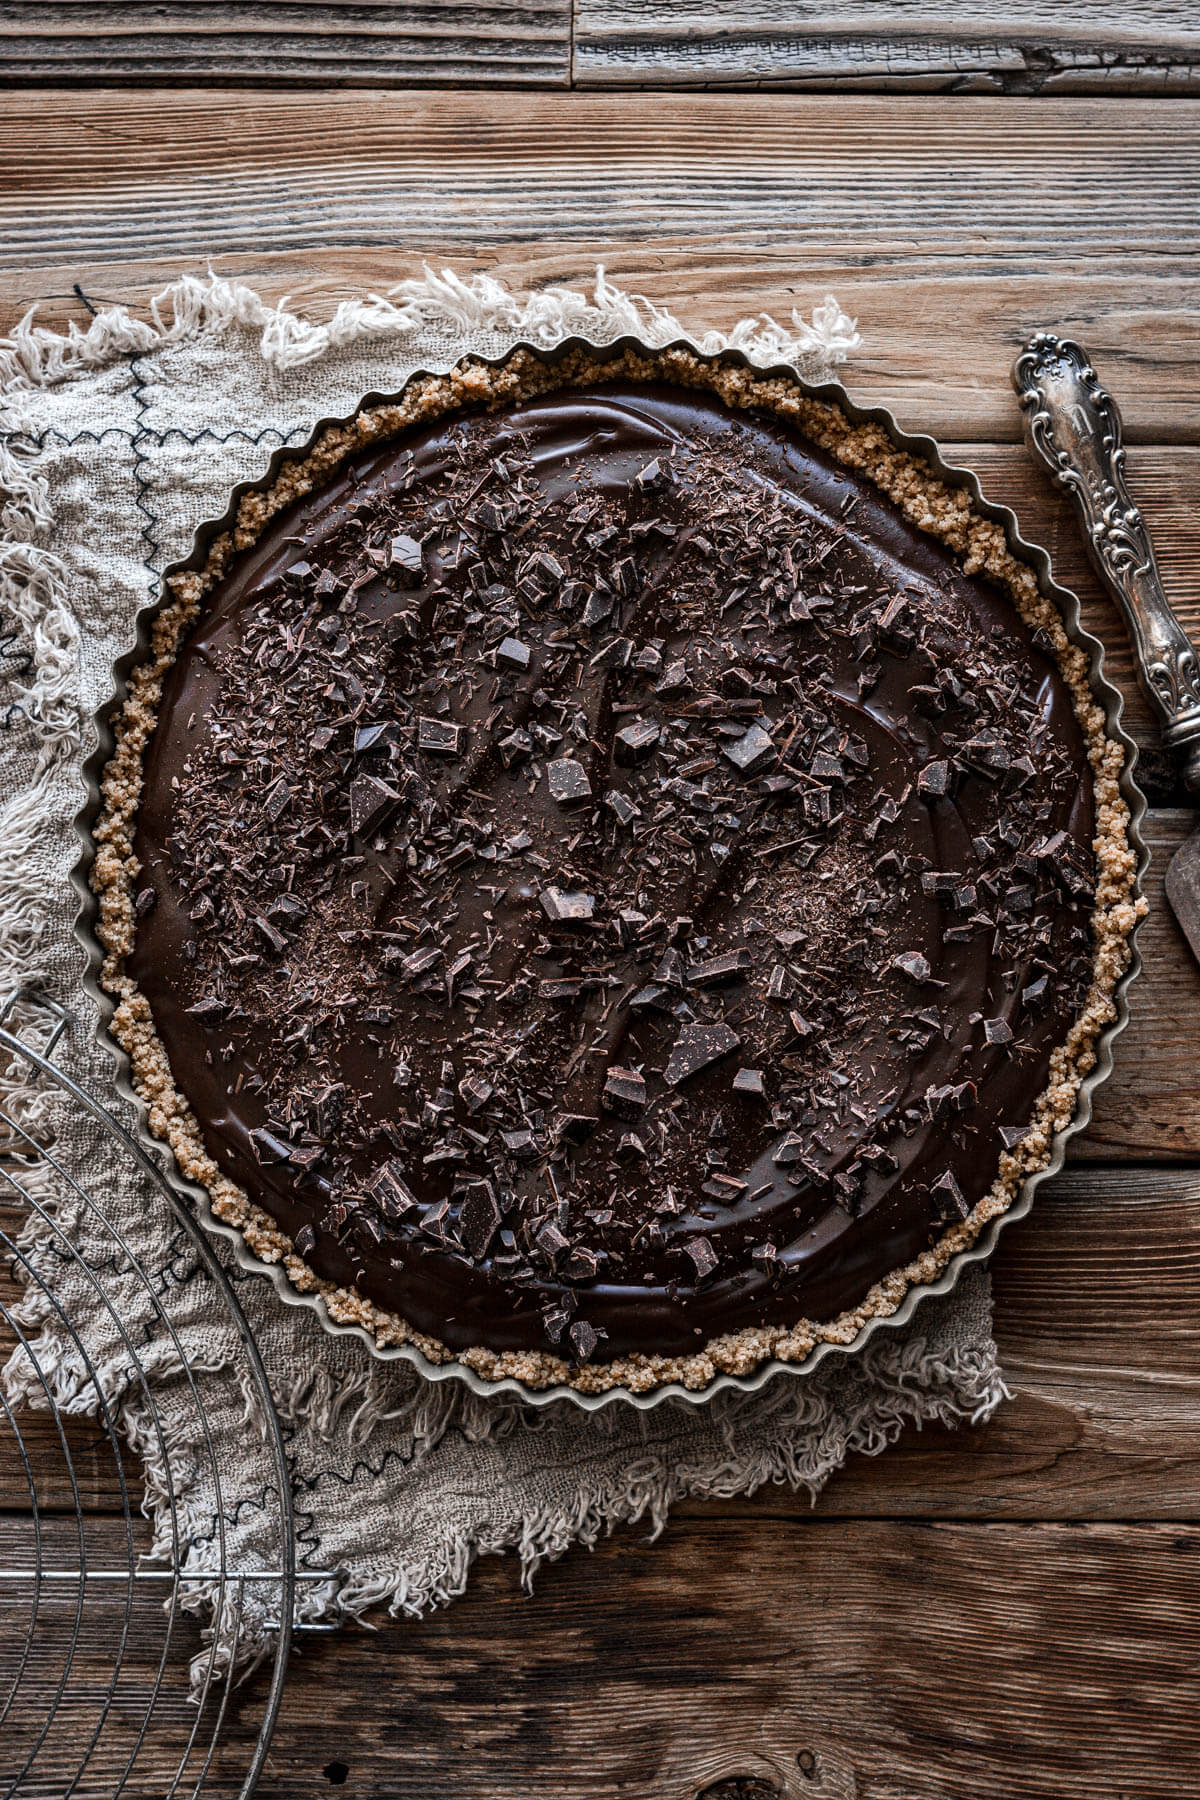 A chocolate cream pie sprinkled with chopped chocolate.